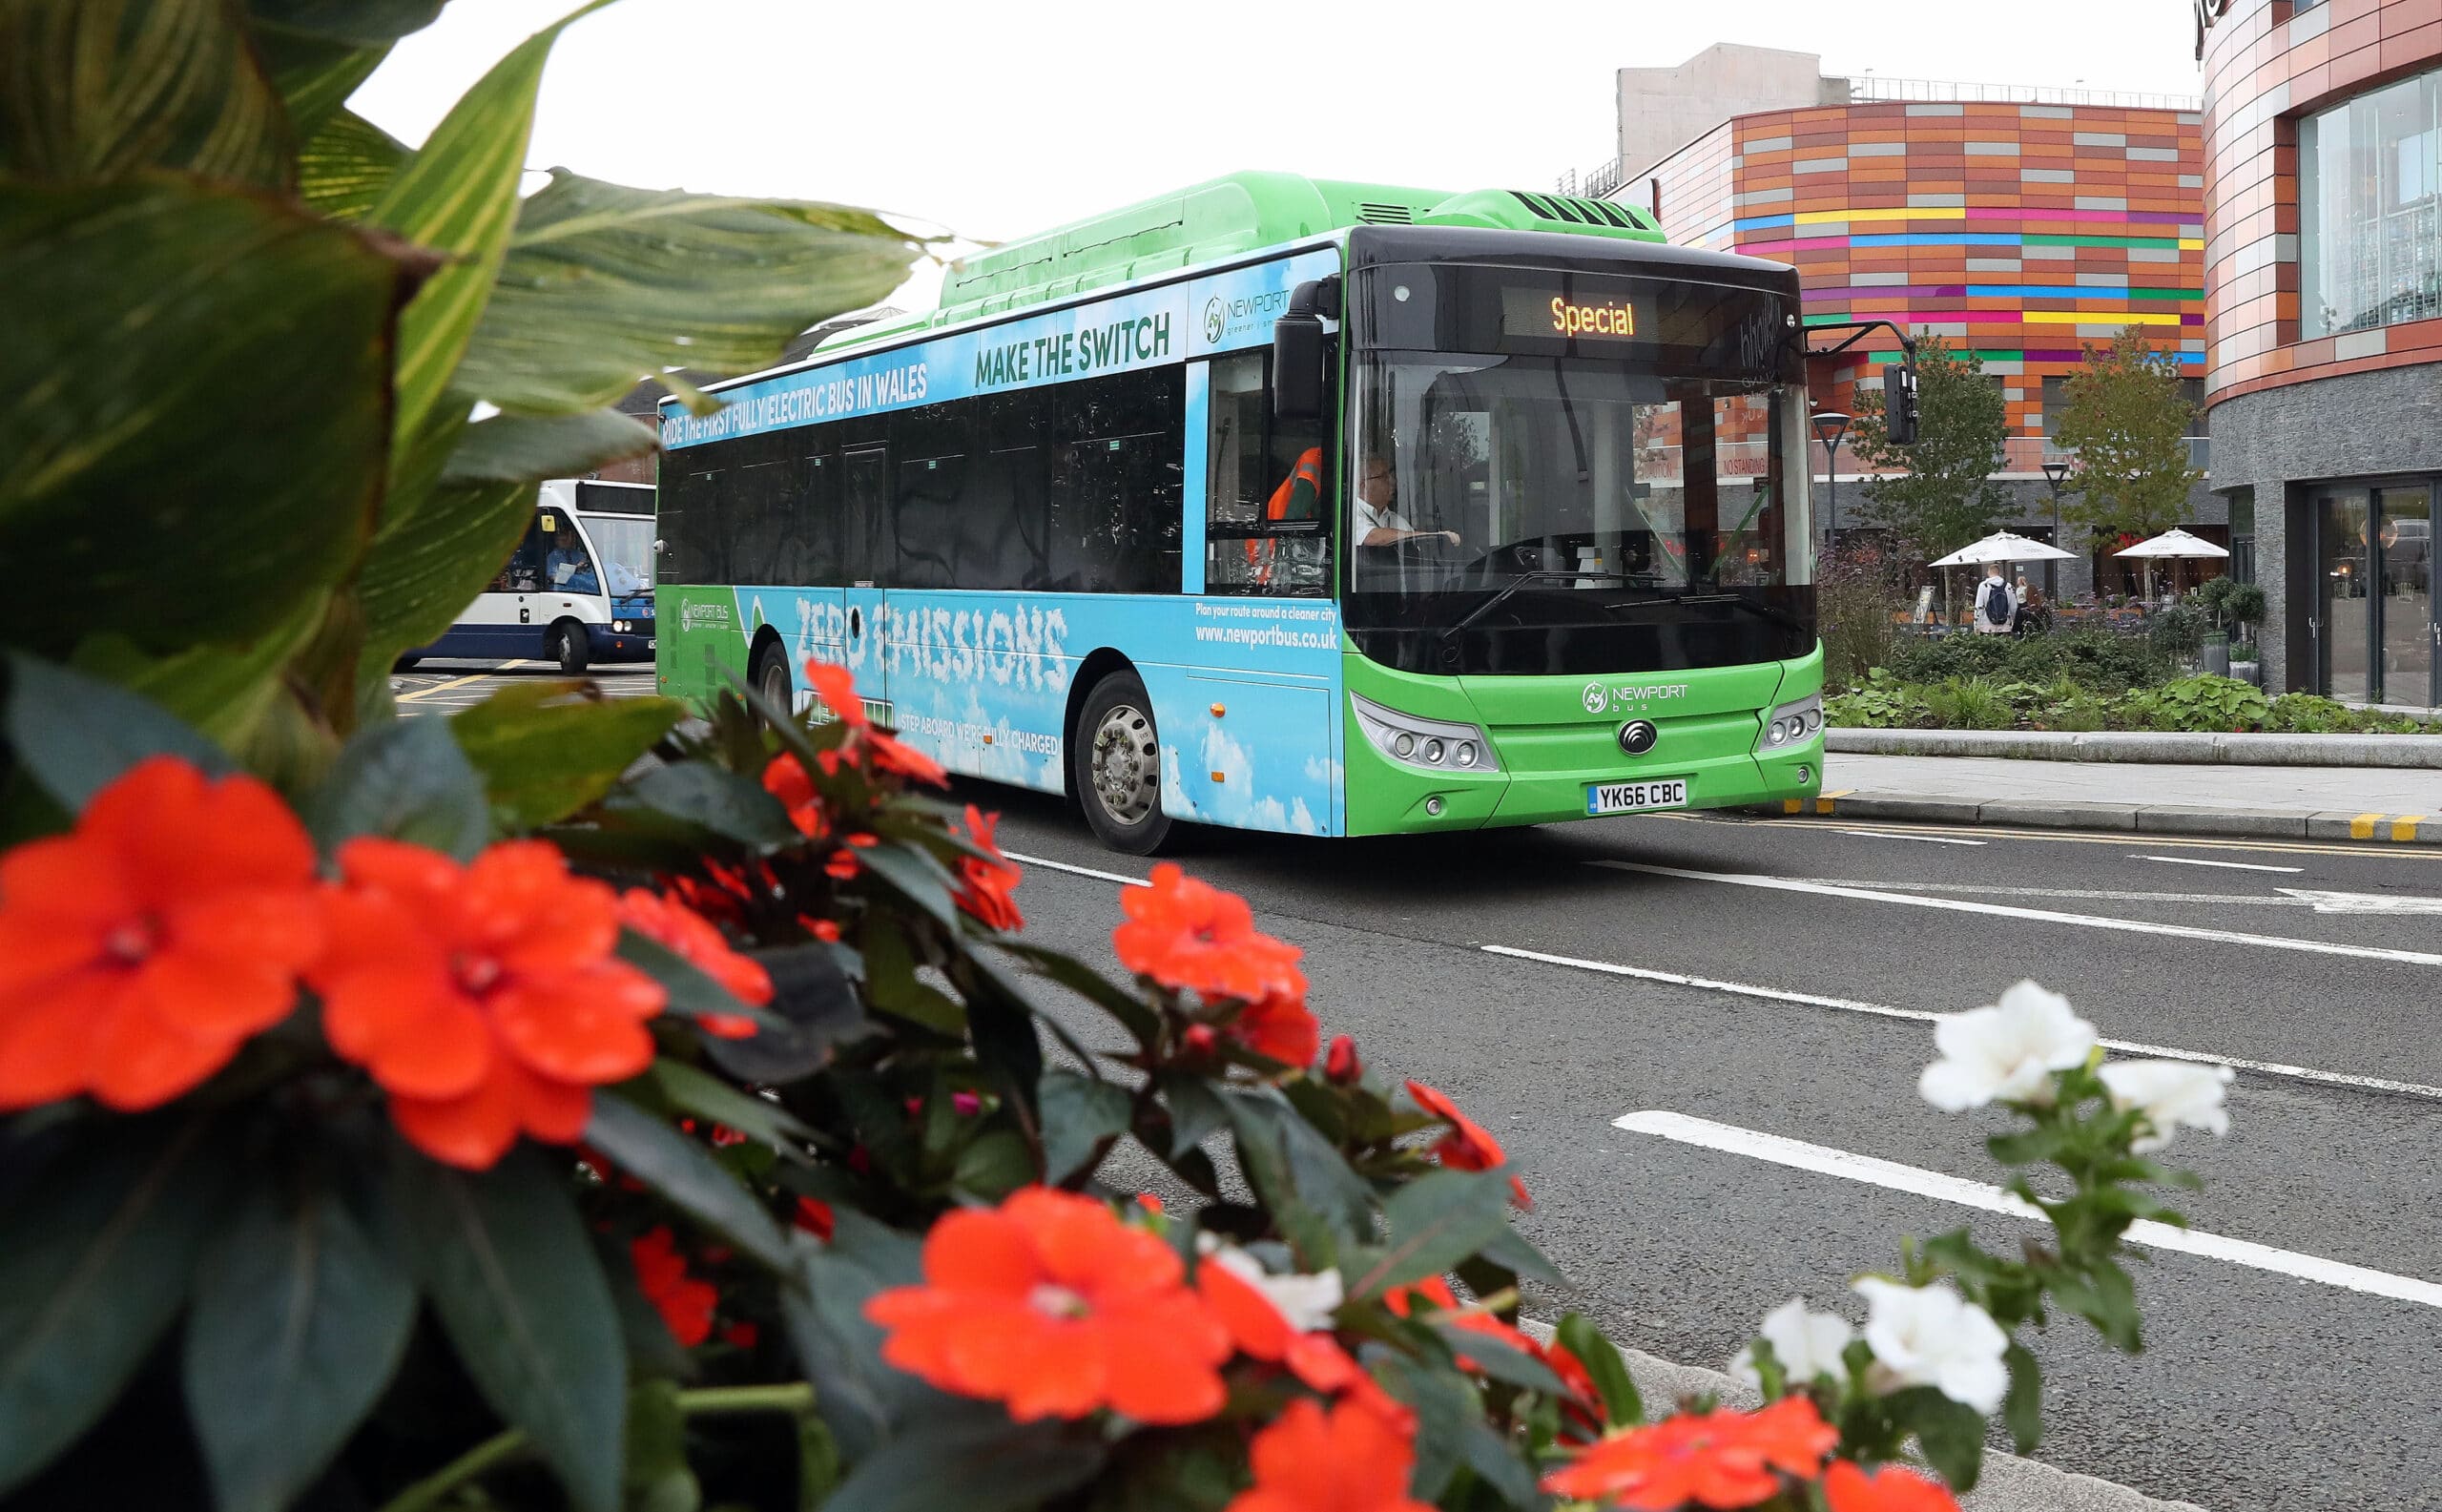 Newport Bus electric bus travelling down a road lined with flowers.